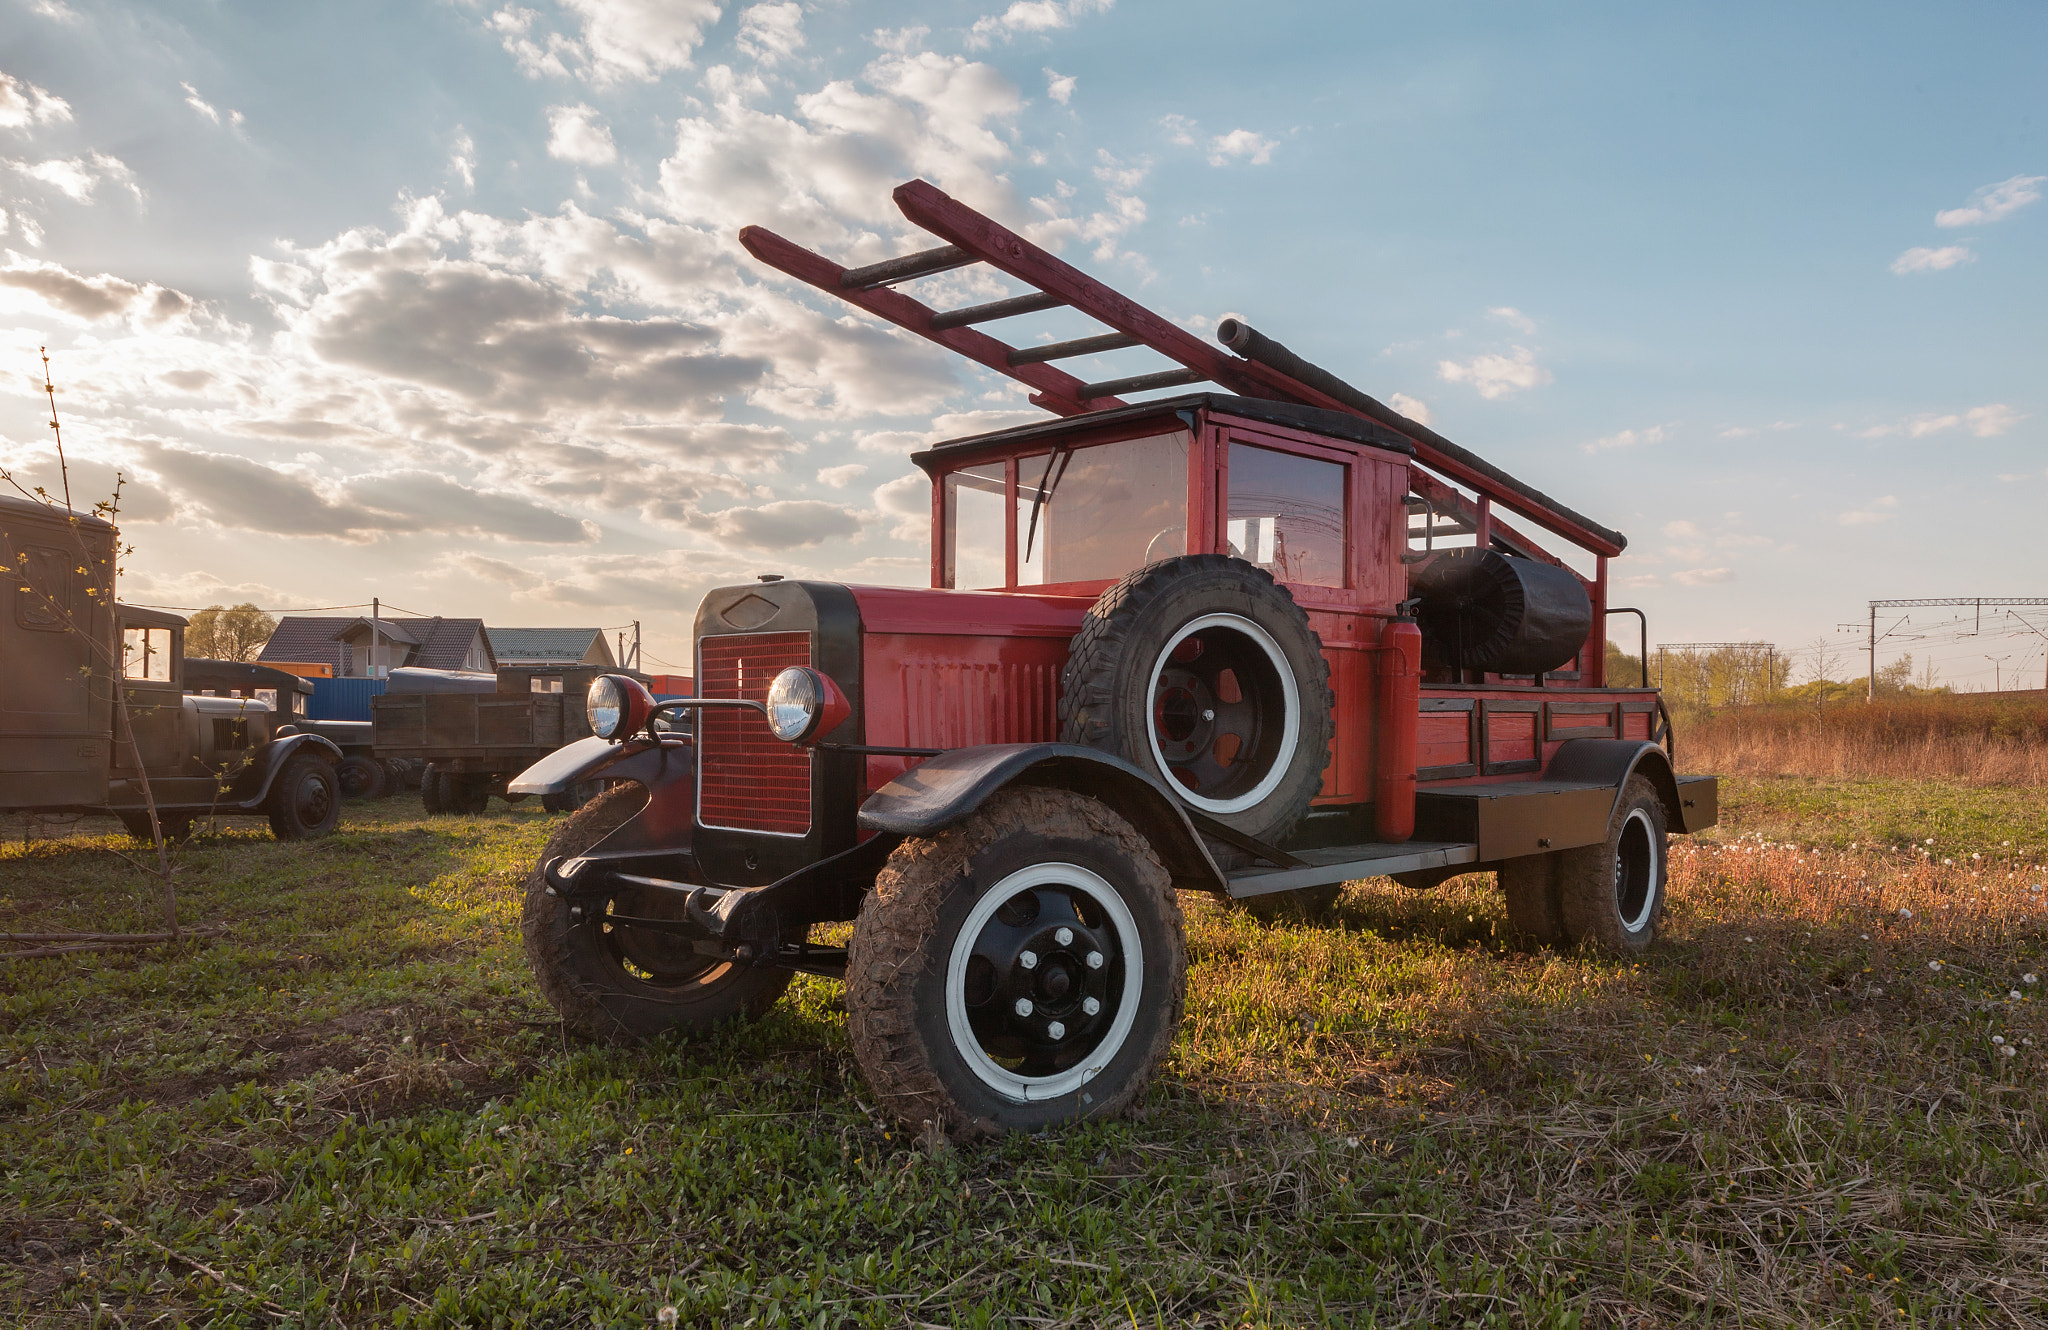 Canon EOS 5D Mark II + Sigma 12-24mm F4.5-5.6 II DG HSM sample photo. Old retro fire truck with wooden case on the field photography